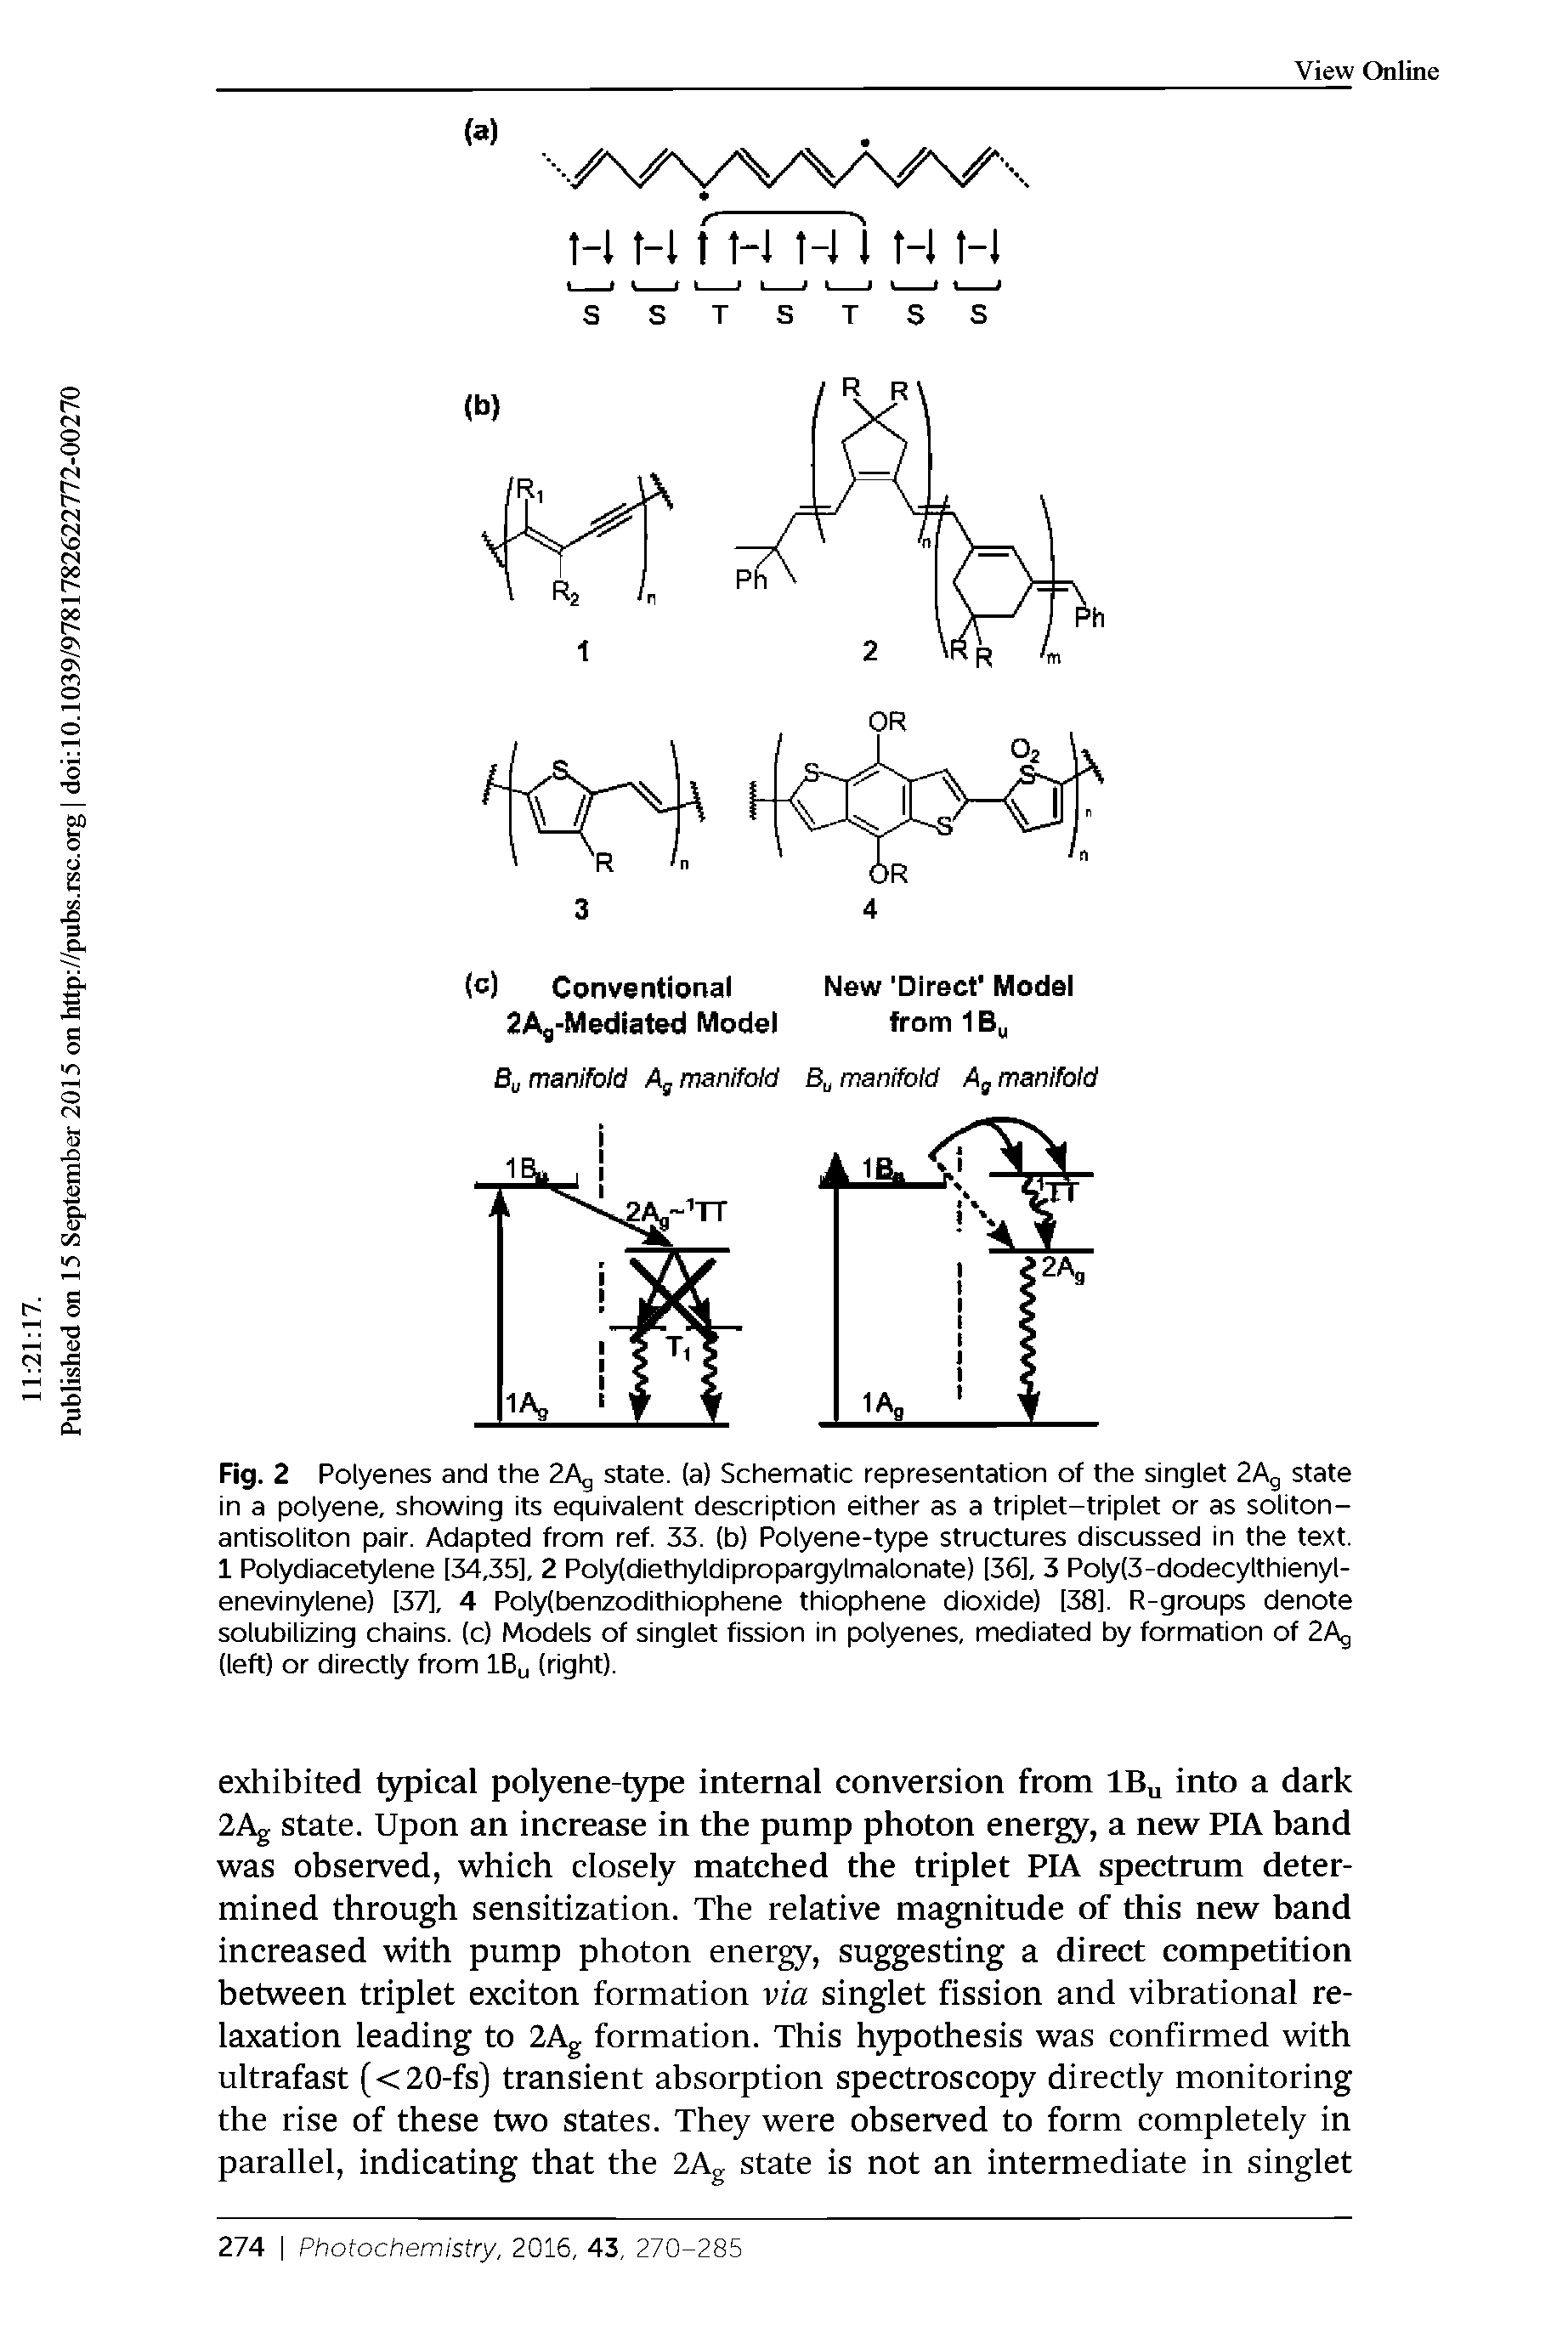 Fig. 2 Polyenes and the 2 state, (a) Schematic representation of the singlet 2Ag state in a polyene, showing its equivalent description either as a triplet-triplet or as soliton-antisoliton pair. Adapted from ref. 33. (b) Polyene-type structures discussed in the text. 1 Polydiacetylene [34,35], 2 Poly(diethyldipropargylmalonate) 136], 3 Poly(3-dodecylthienyl-enevinylene) [37], 4 Polyibenzodithiophene thiophene dioxide) [38]. R-groups denote solubilizing chains, (c) Models of singlet fission in polyenes, mediated by formation of 2Ag (left) or directly from IBu (right).